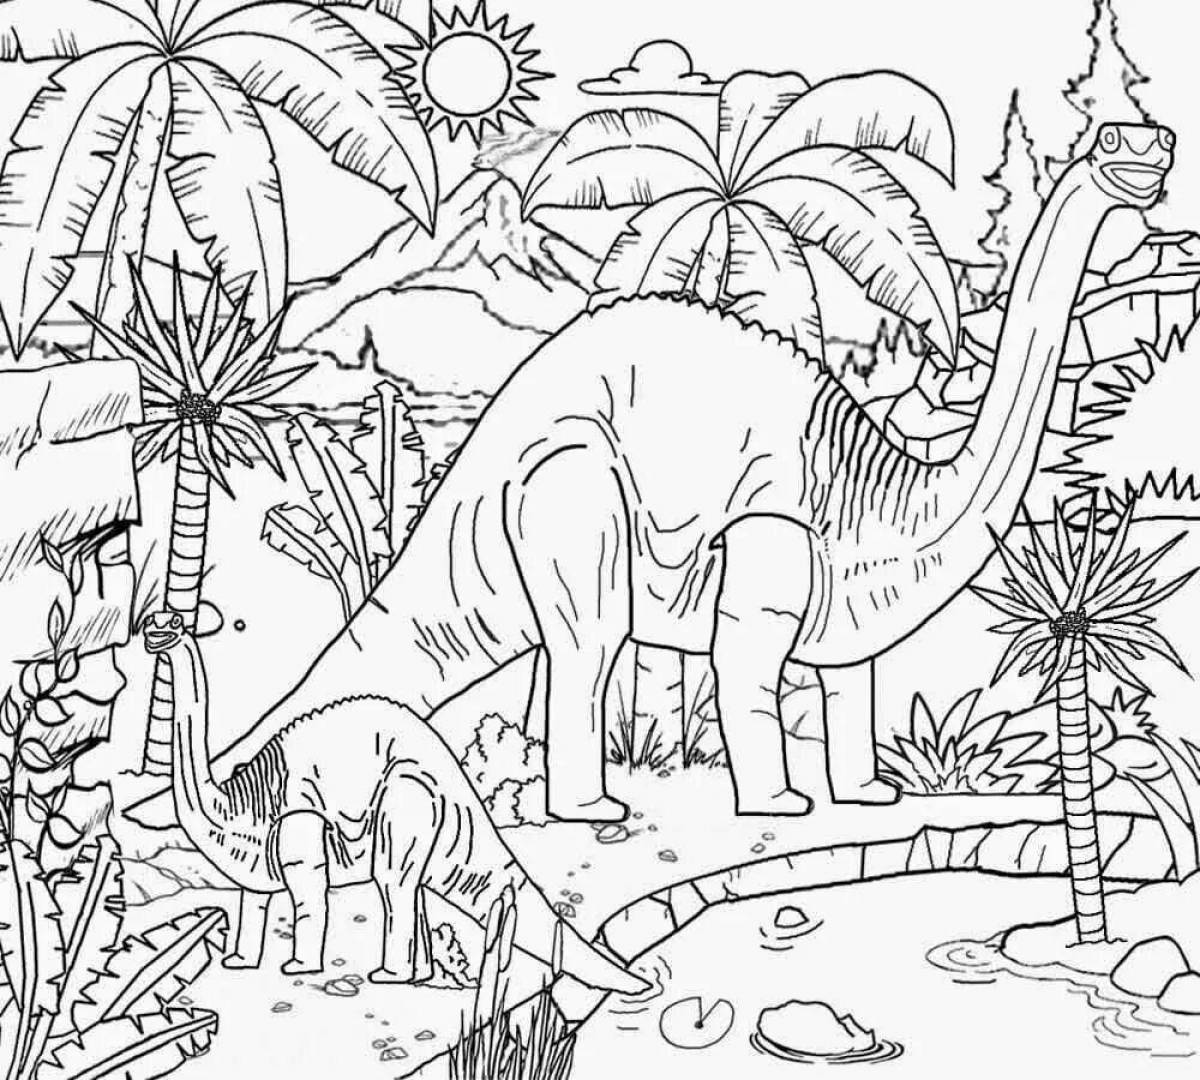 Colorful jurassic park coloring pages for kids